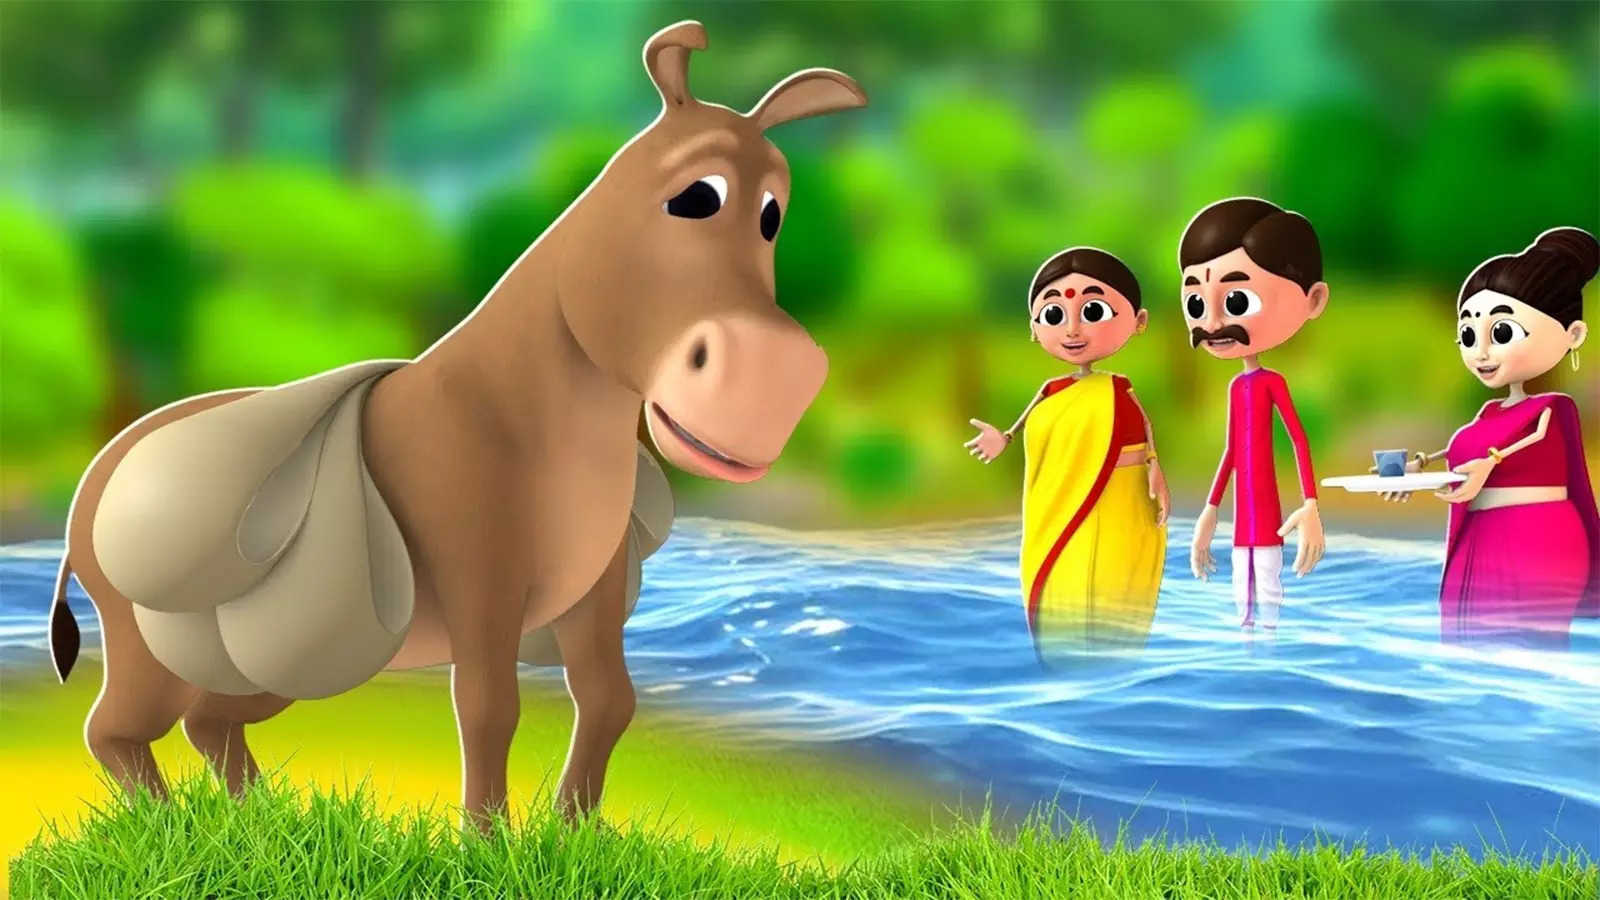 Latest Children Hindi Story 'Donkey's Road' For Kids - Check Out Kids's  Nursery Rhymes And Baby Songs In Hindi | Entertainment - Times of India  Videos